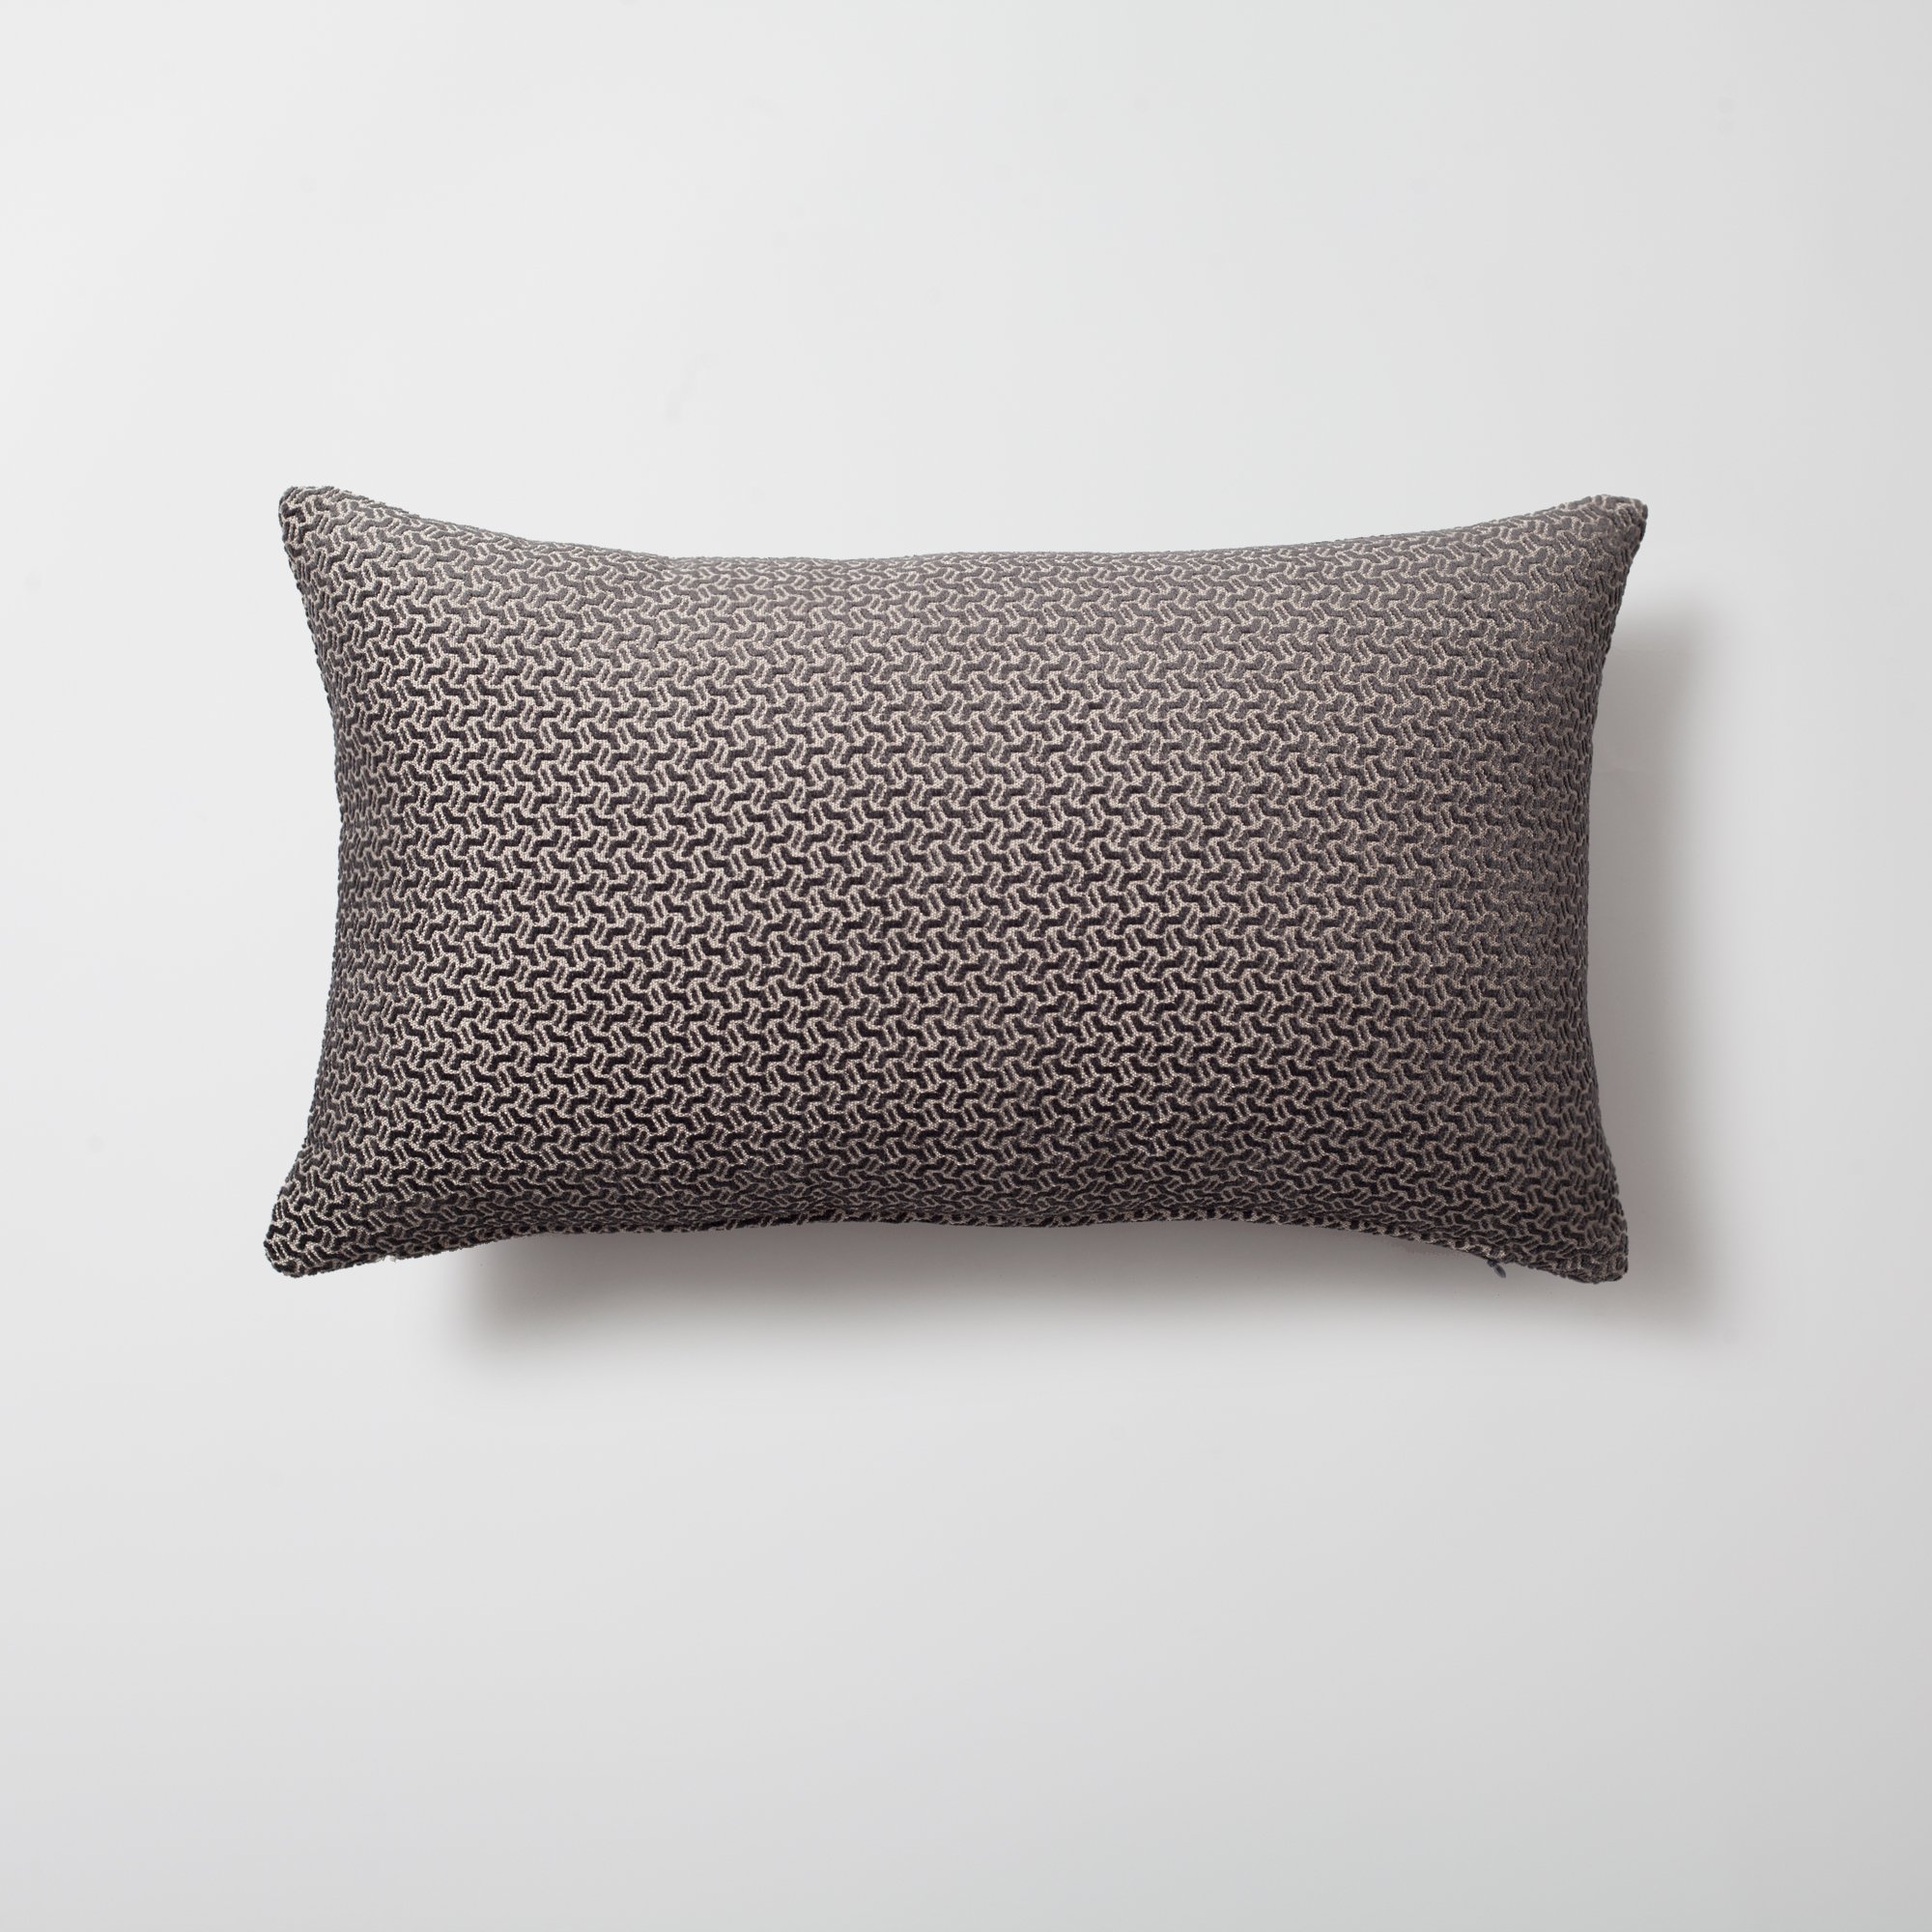 "Arte" - Geometric Patterned 12x20 Inch Cushion - Anthracite (Cover Only)